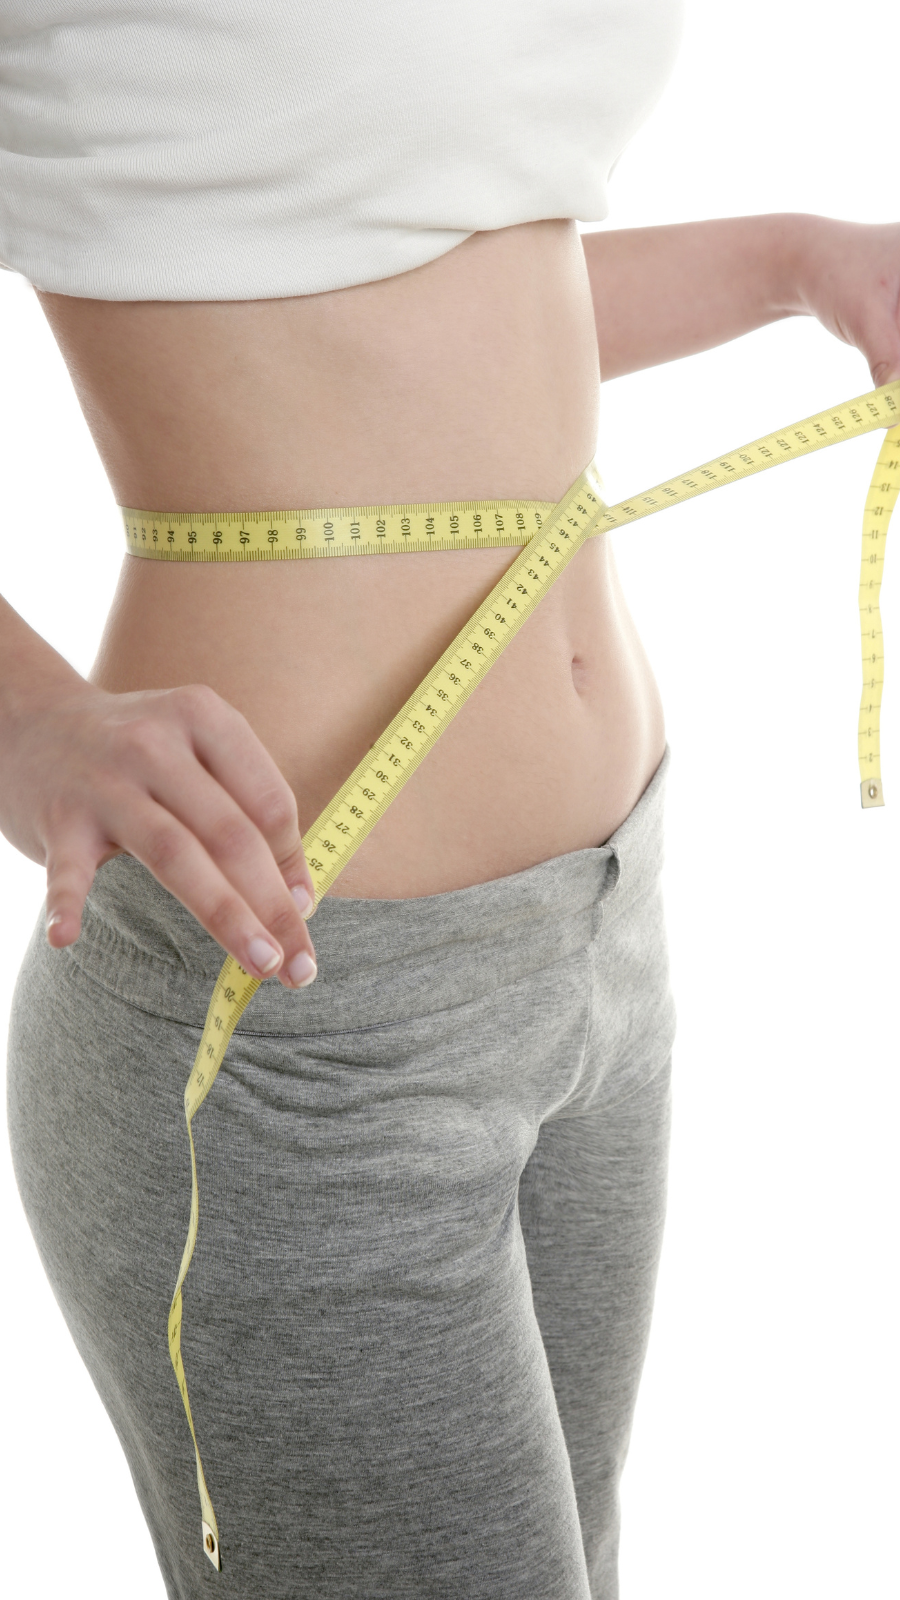 How to reduce belly fat: Expert tips to reduce lower belly fat